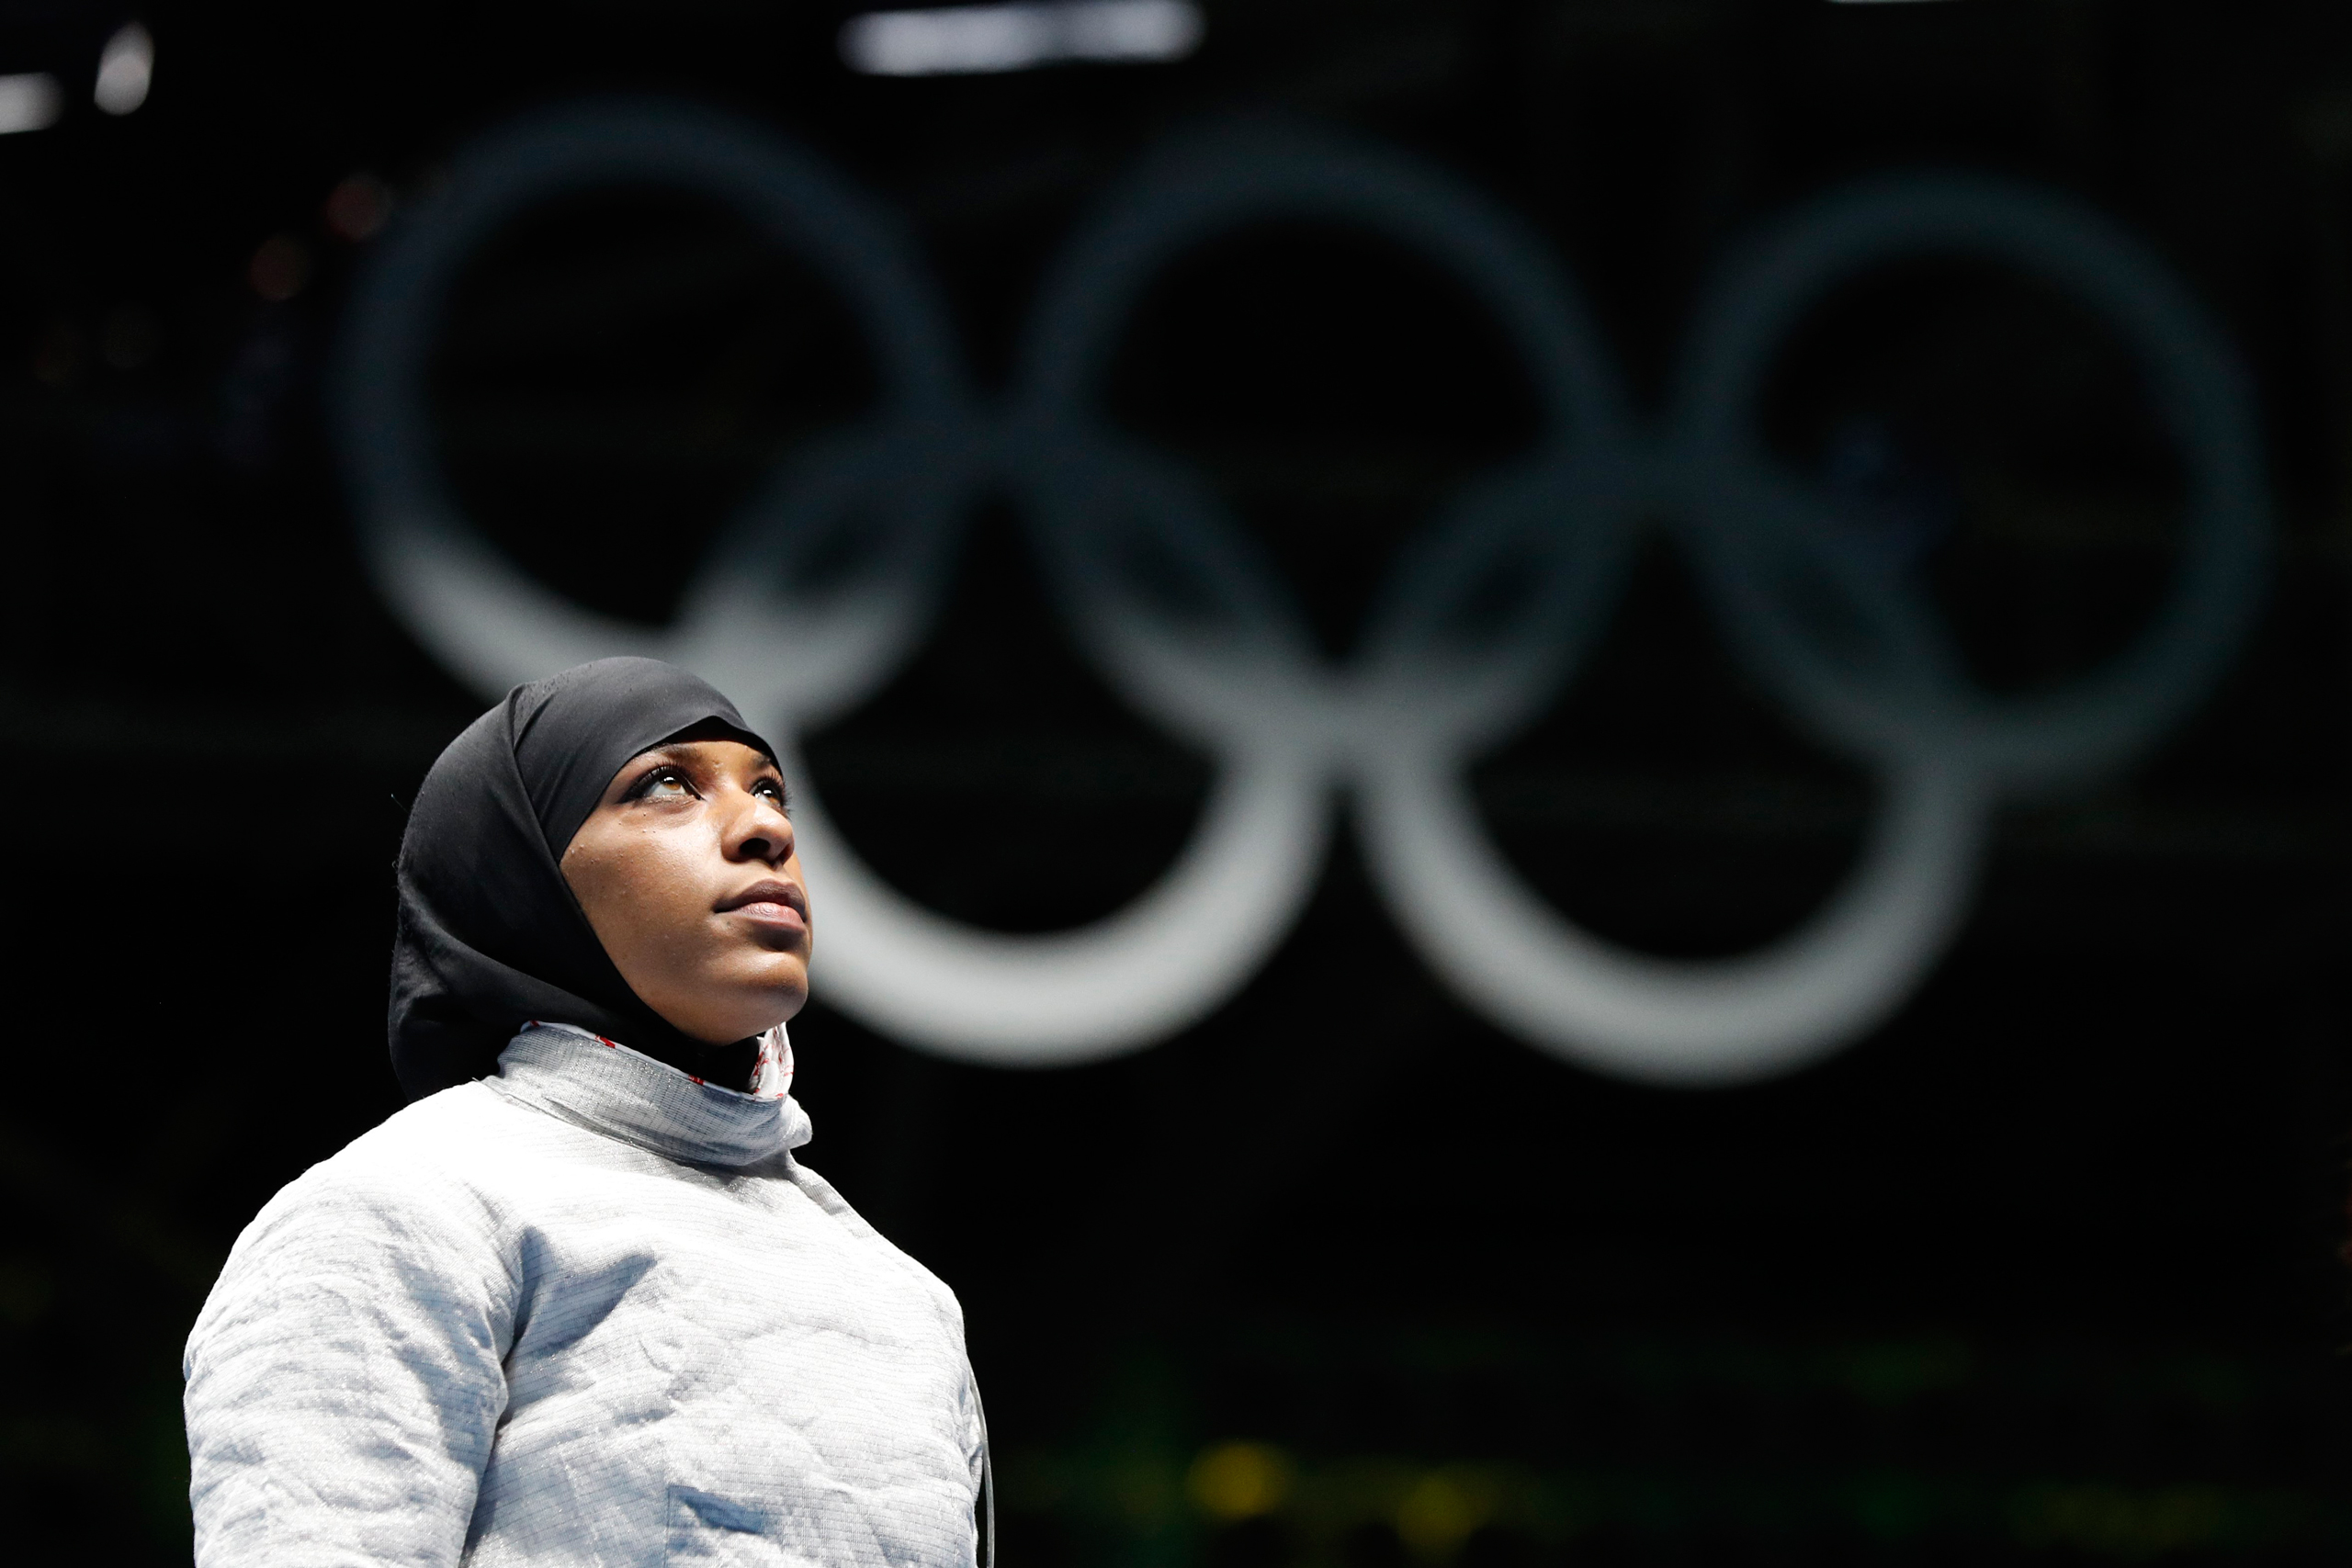 Ibtihaj Muhammad (United States) waits to compete against Olena Kravatska (Ukraine) in the women's sabre individual fencing match at the 2016 Summer Olympics in Rio de Janeiro on Aug. 8, 2016. (Vincent Thian—AP)